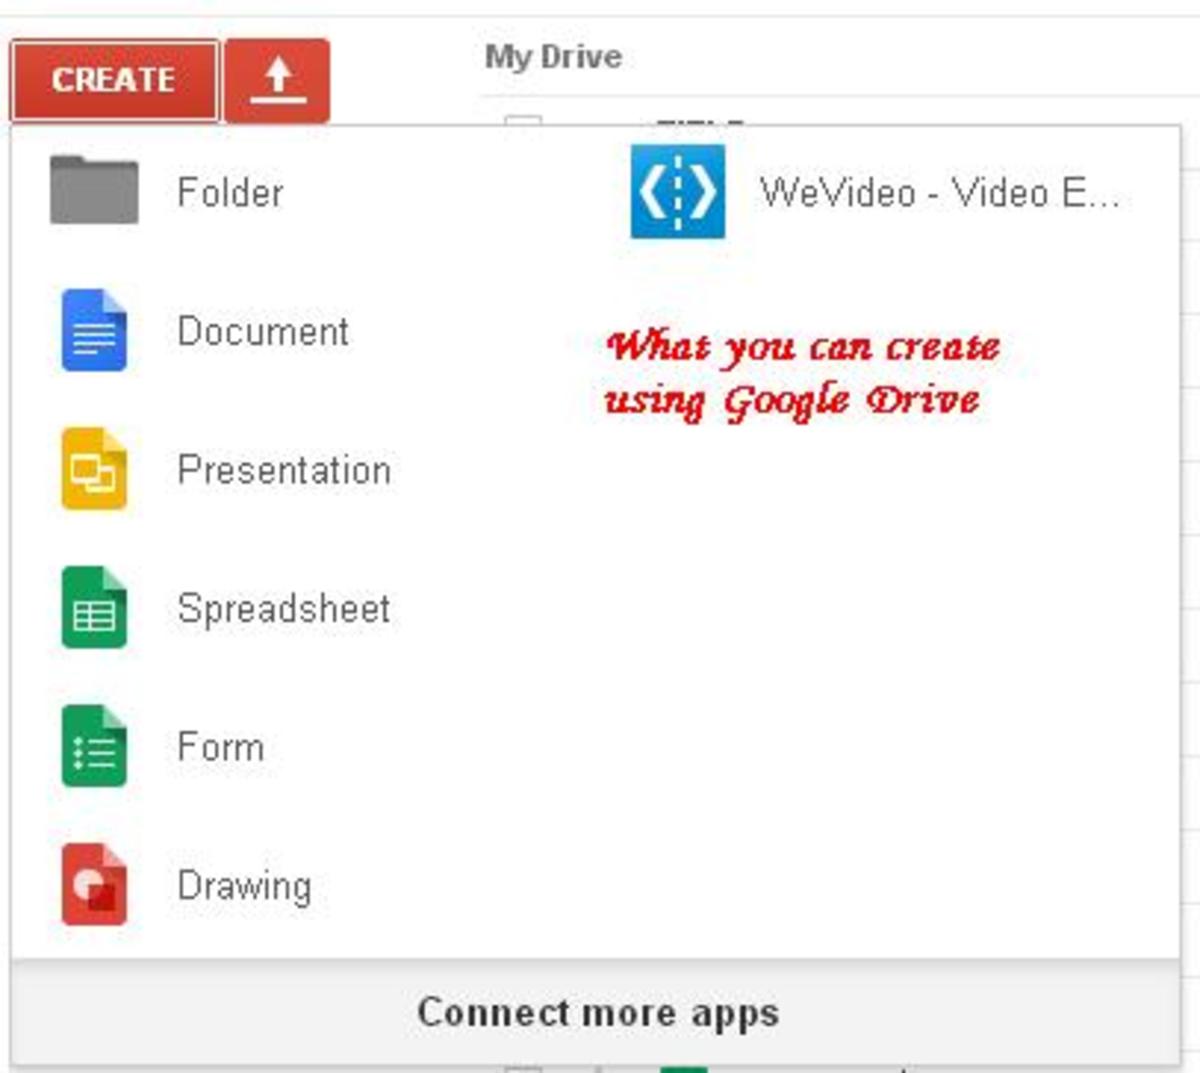 Google Docs are also available within Google Drive